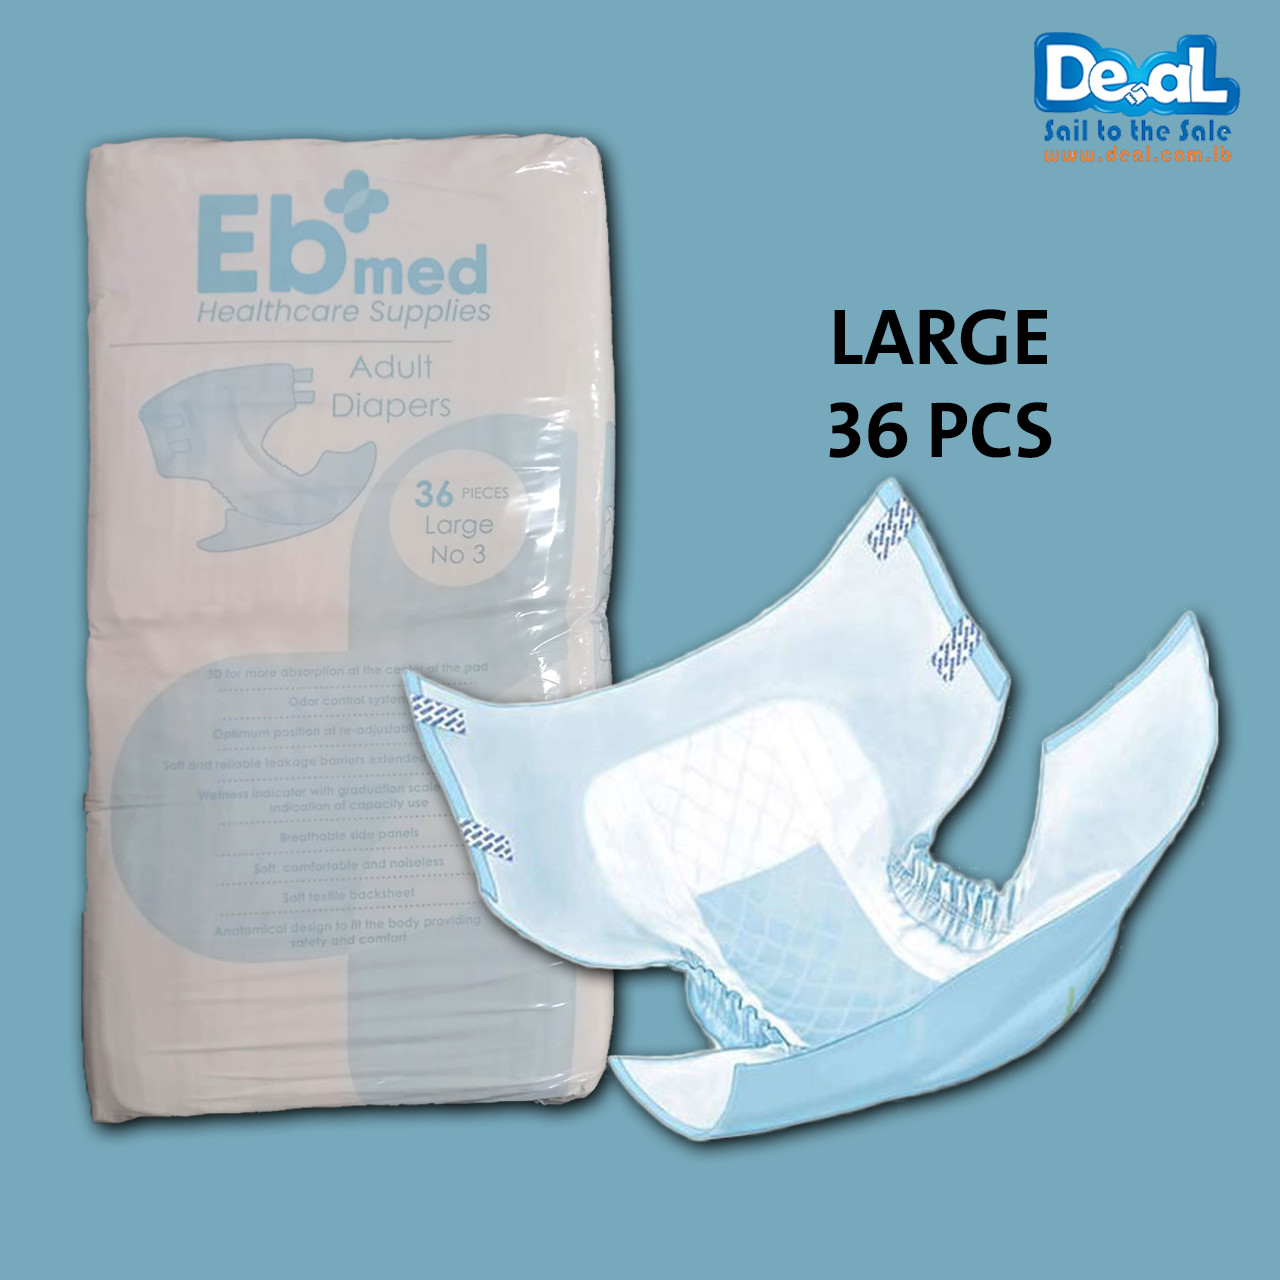 Eb+med+Adult+Diapers+36Pieces+%7C+Large+Size